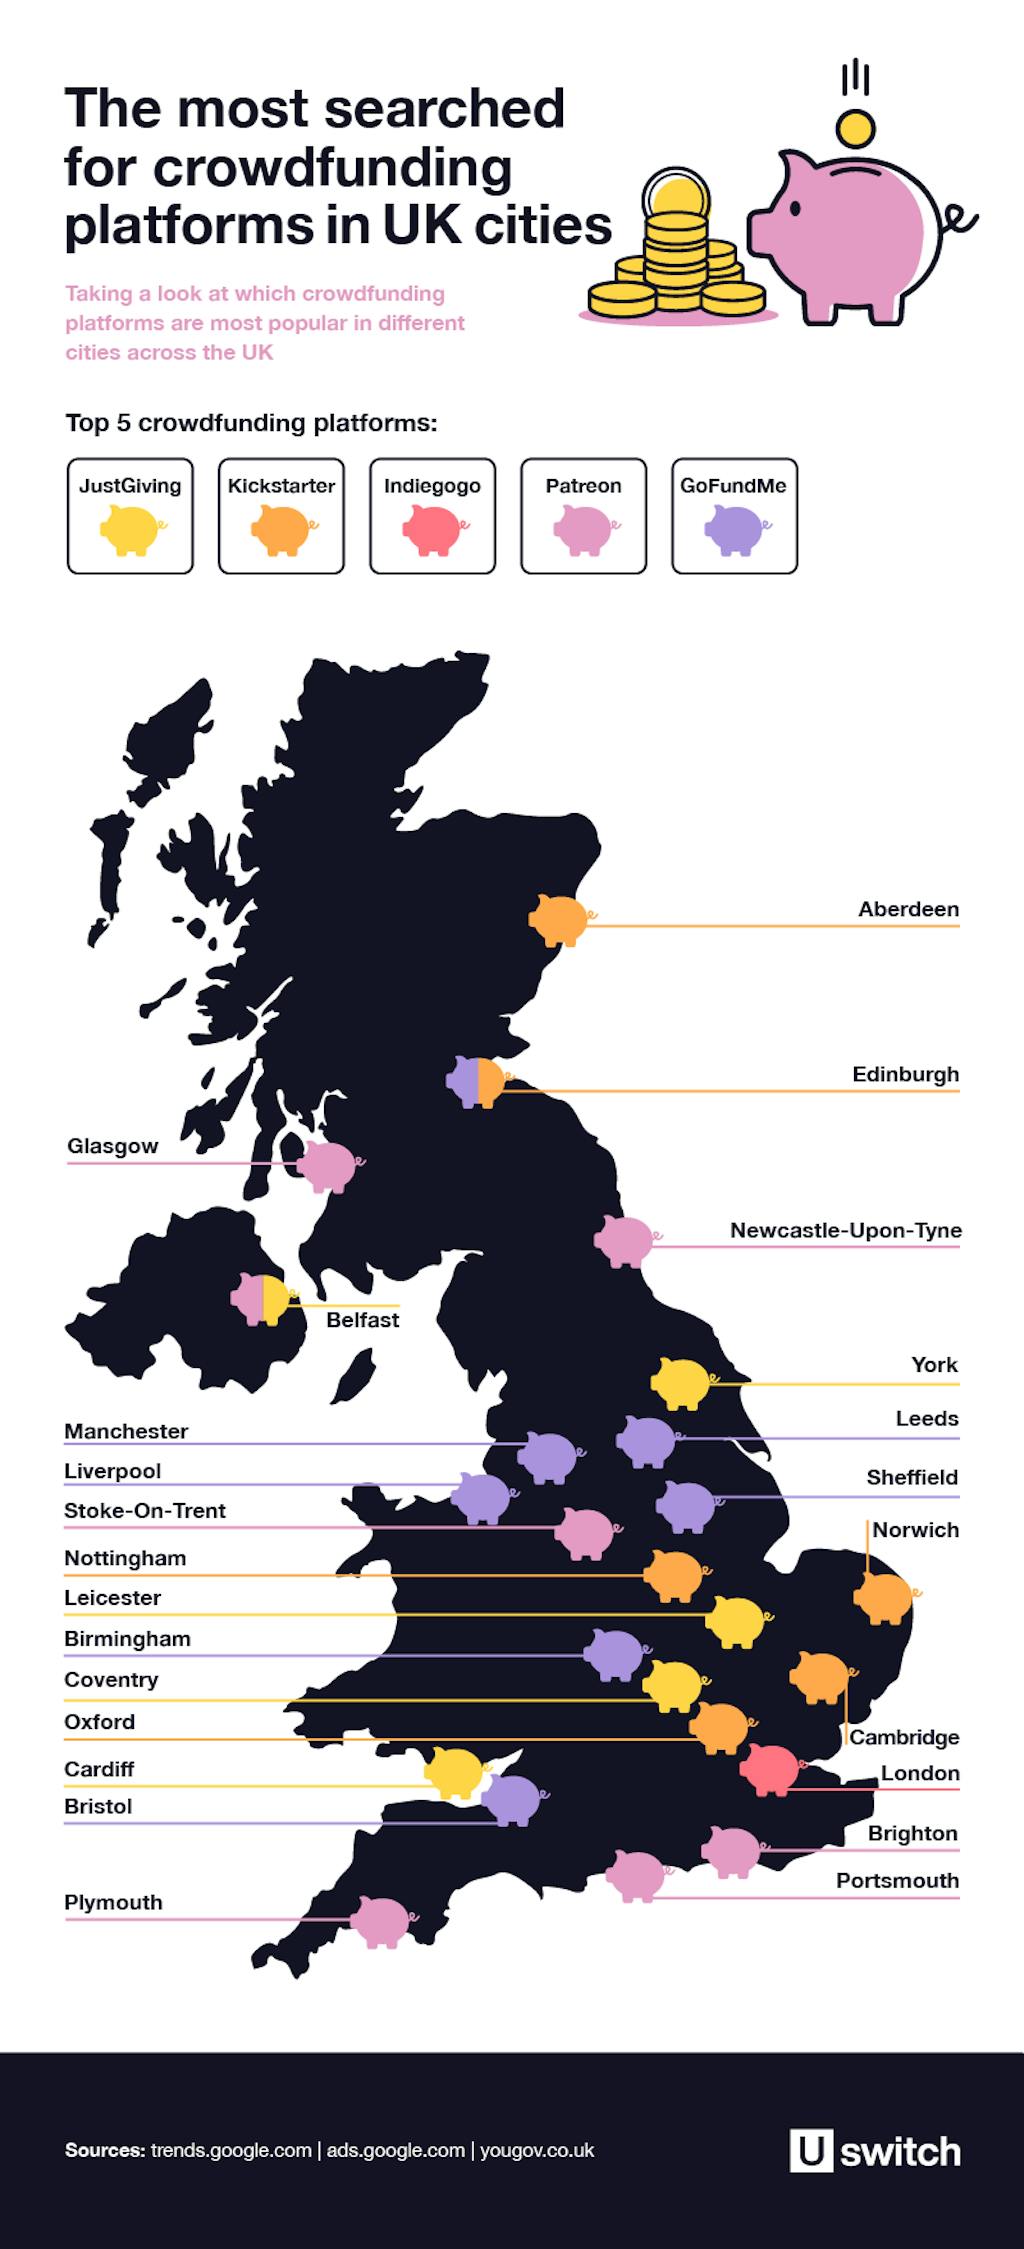 The most-searched-for crowdfunding platform in UK cities